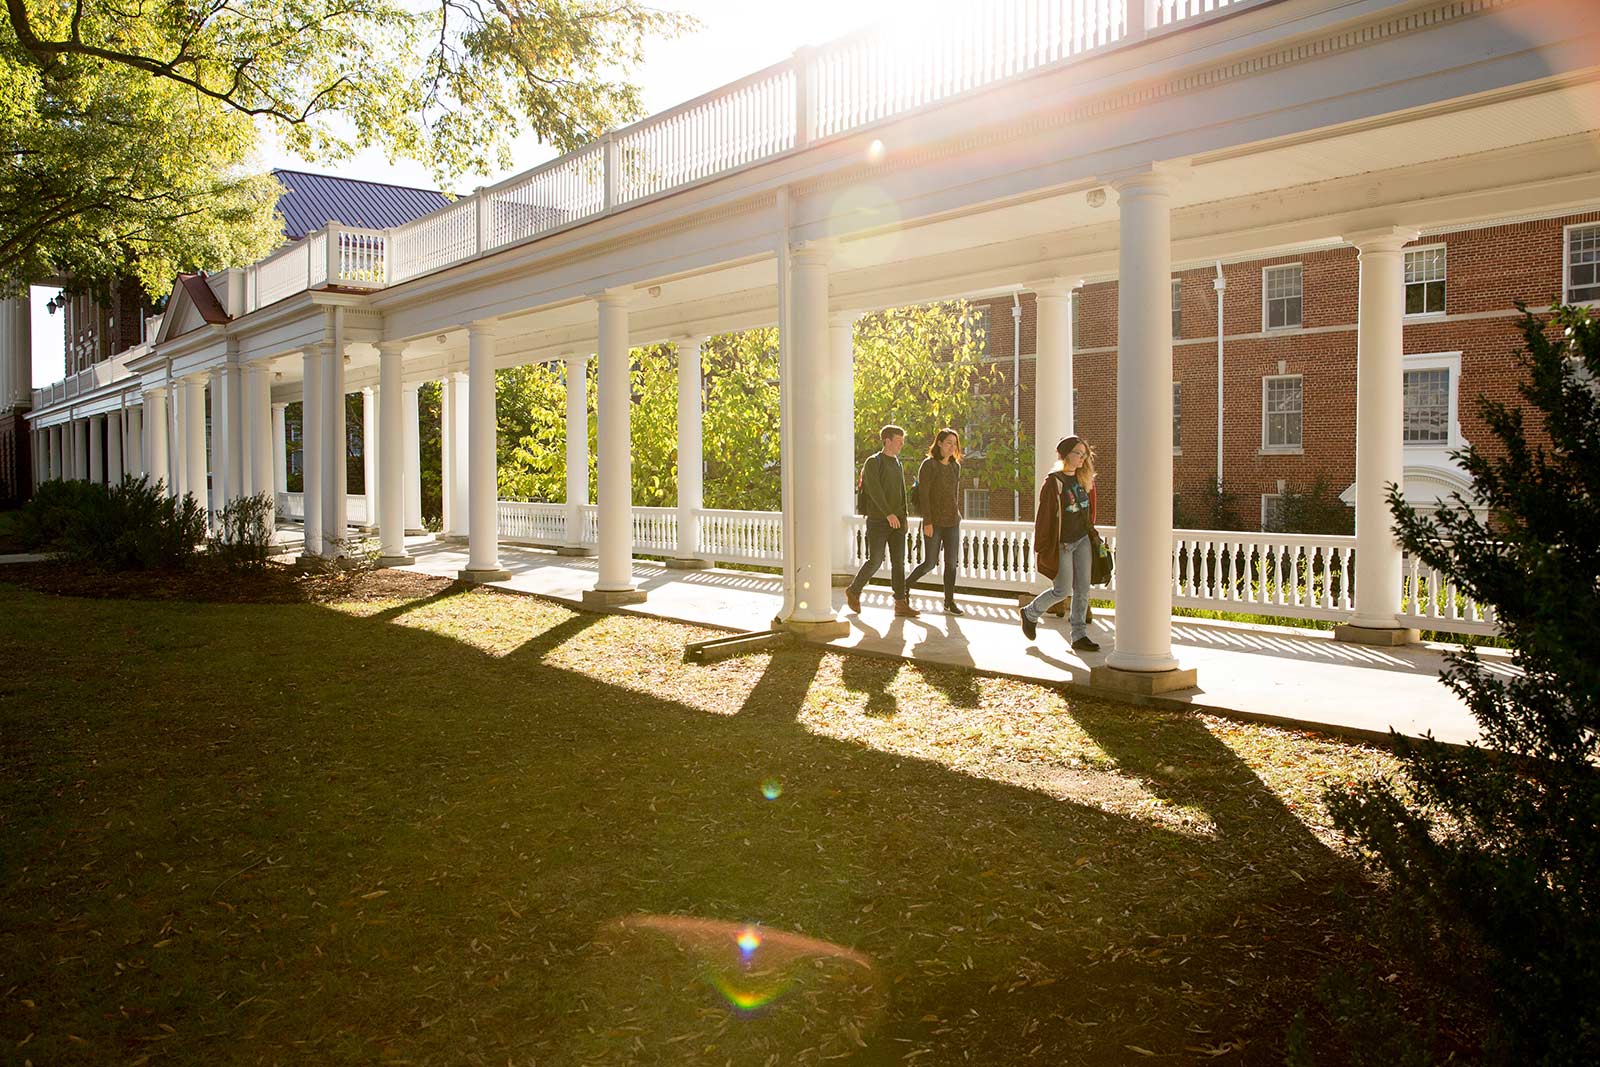 When the light is just right, walking to class is like walking through nearly 200 years of history. The Colonnades hold a special place on campus—the traditional spot for iconic graduation photos and, shhhhhh, the start of CHI walks.